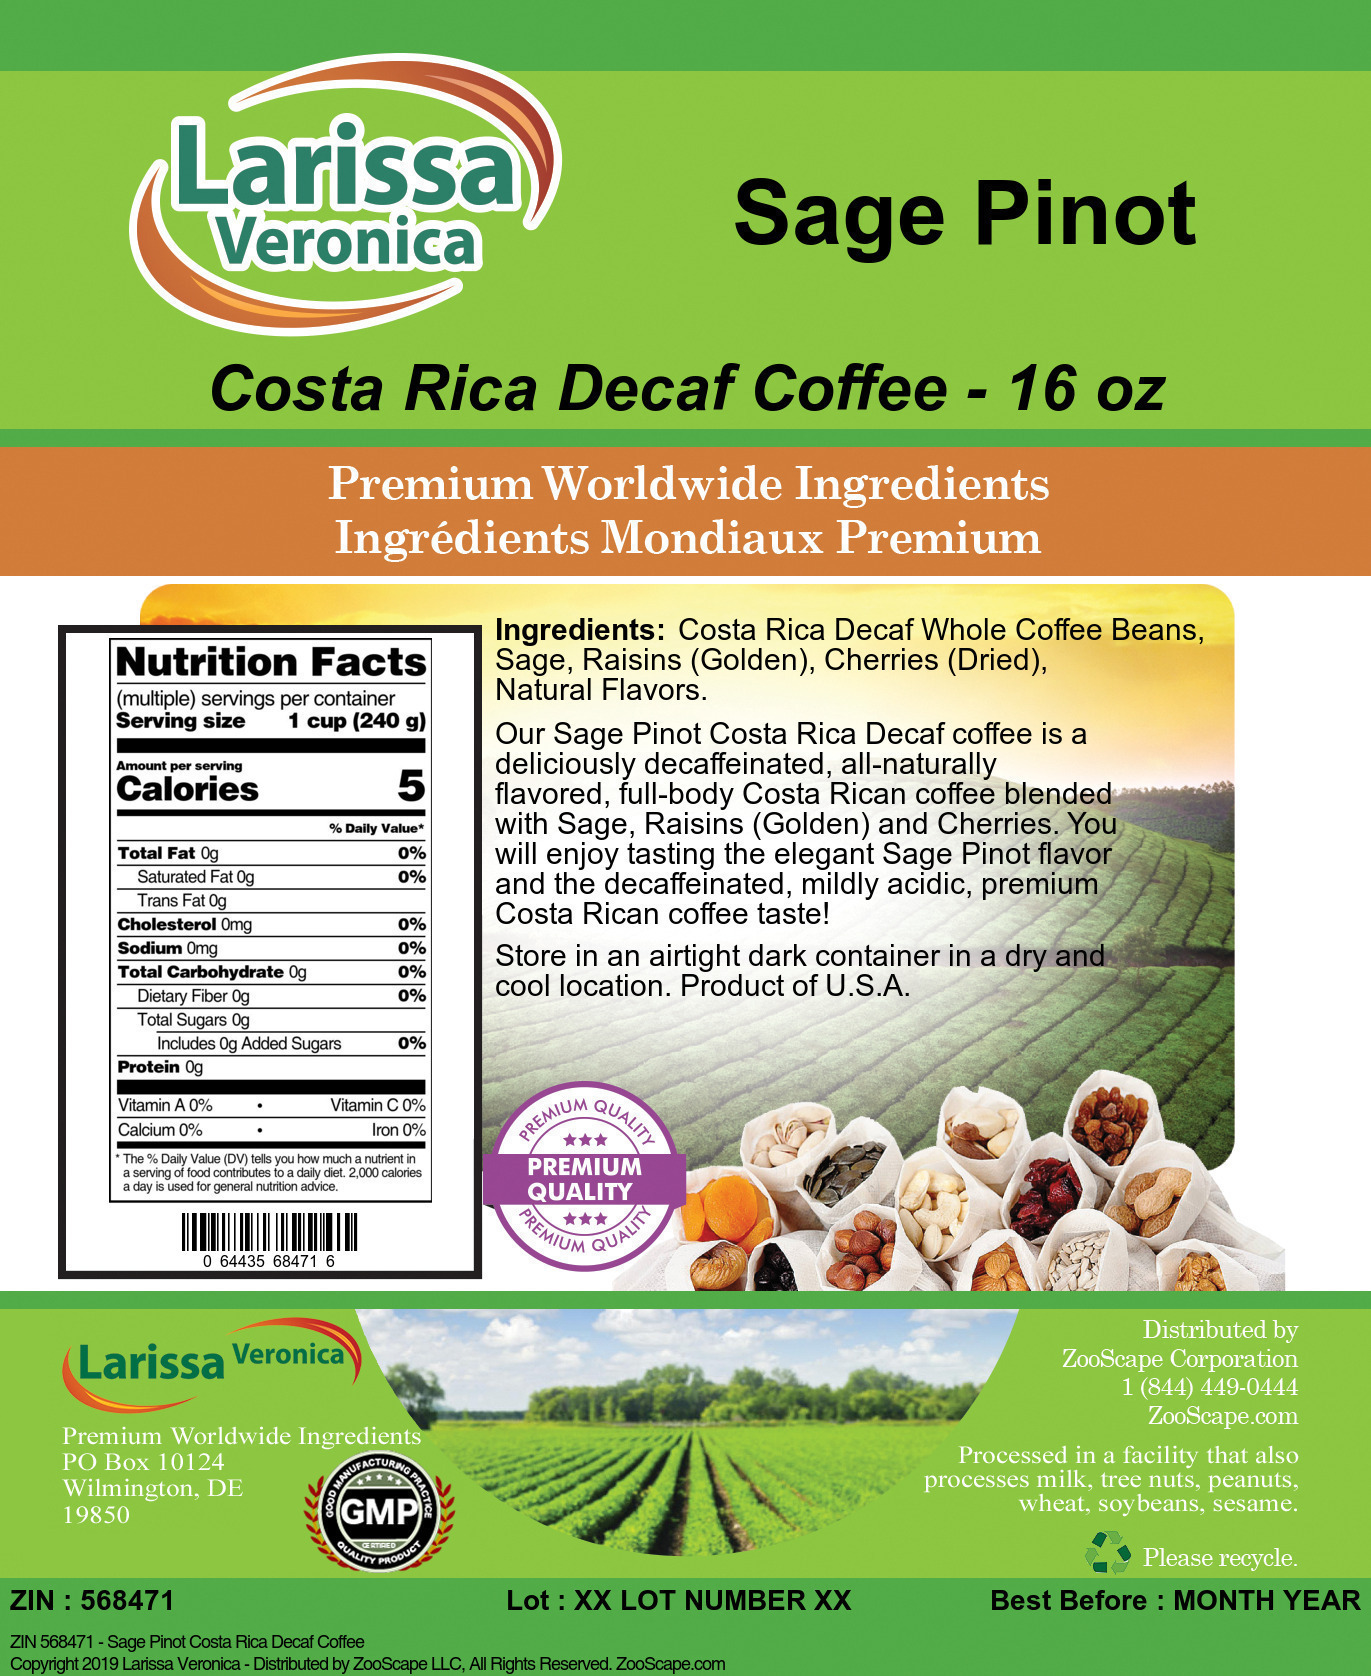 Sage Pinot Costa Rica Decaf Coffee - Label